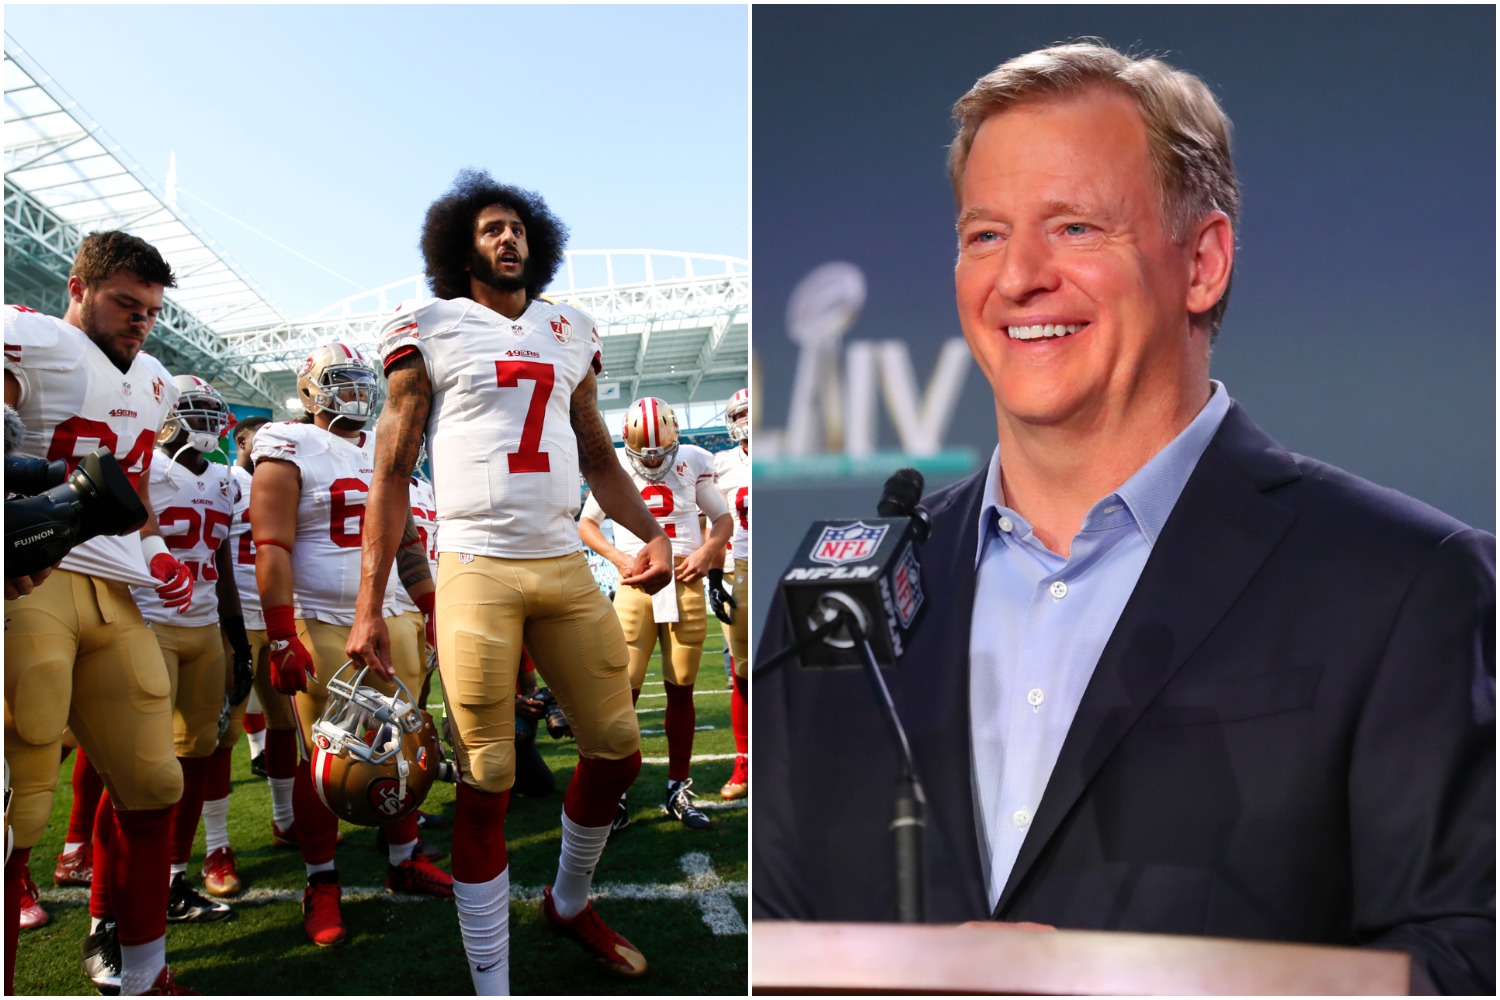 Roger Goodell just admitted his true feelings about Colin Kaepernick, who has not played in the NFL since 2016.